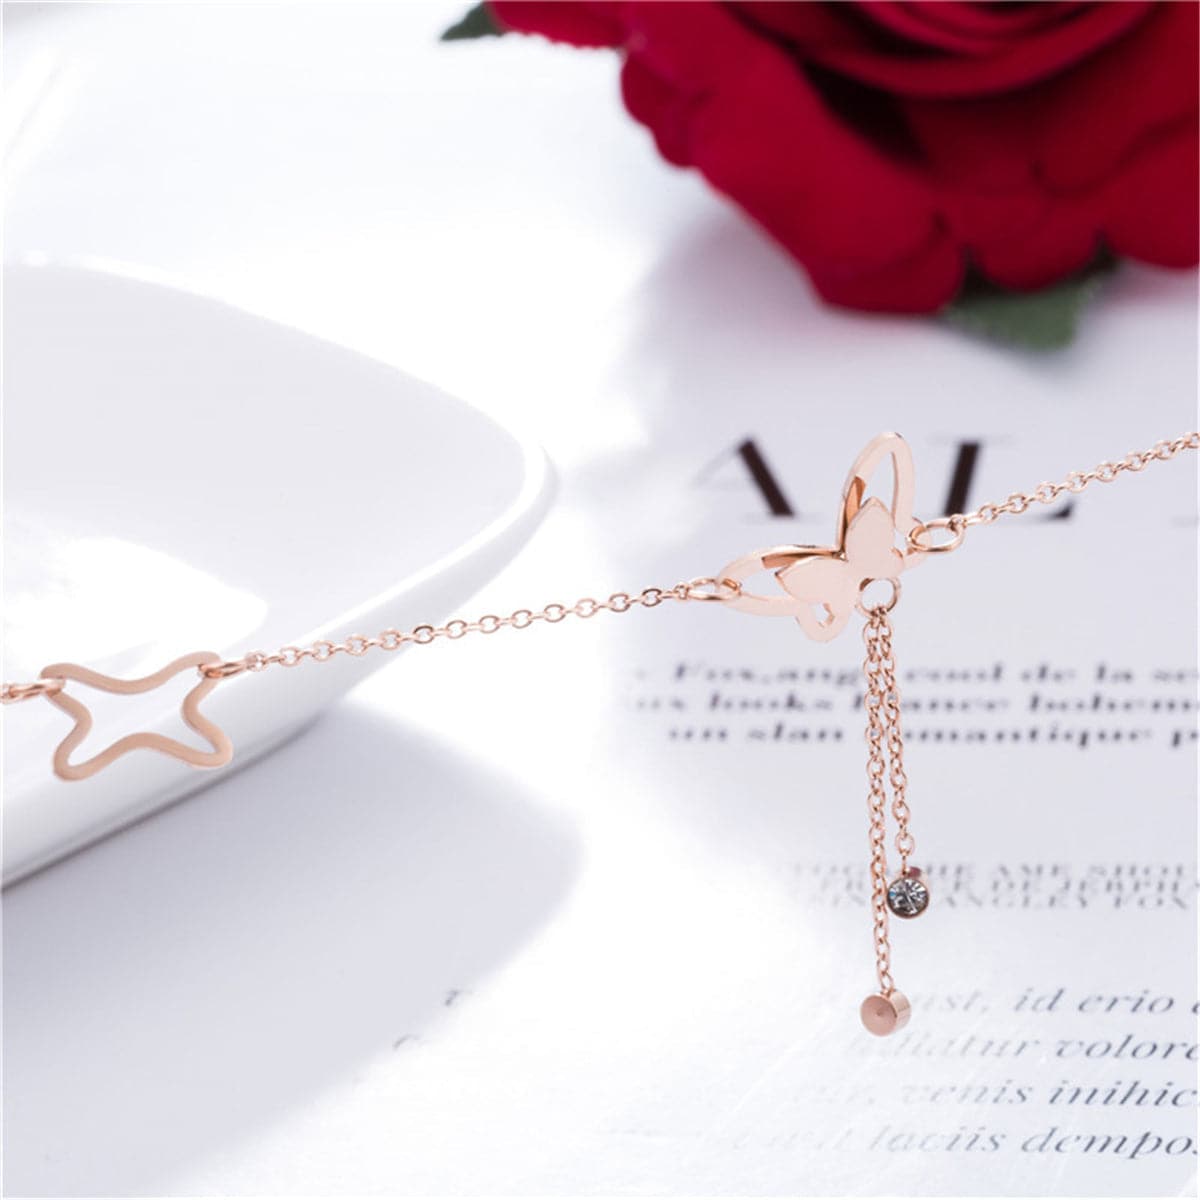 Cubic Zirconia & 18K Rose Gold-Plated Butterfly Charm Anklet